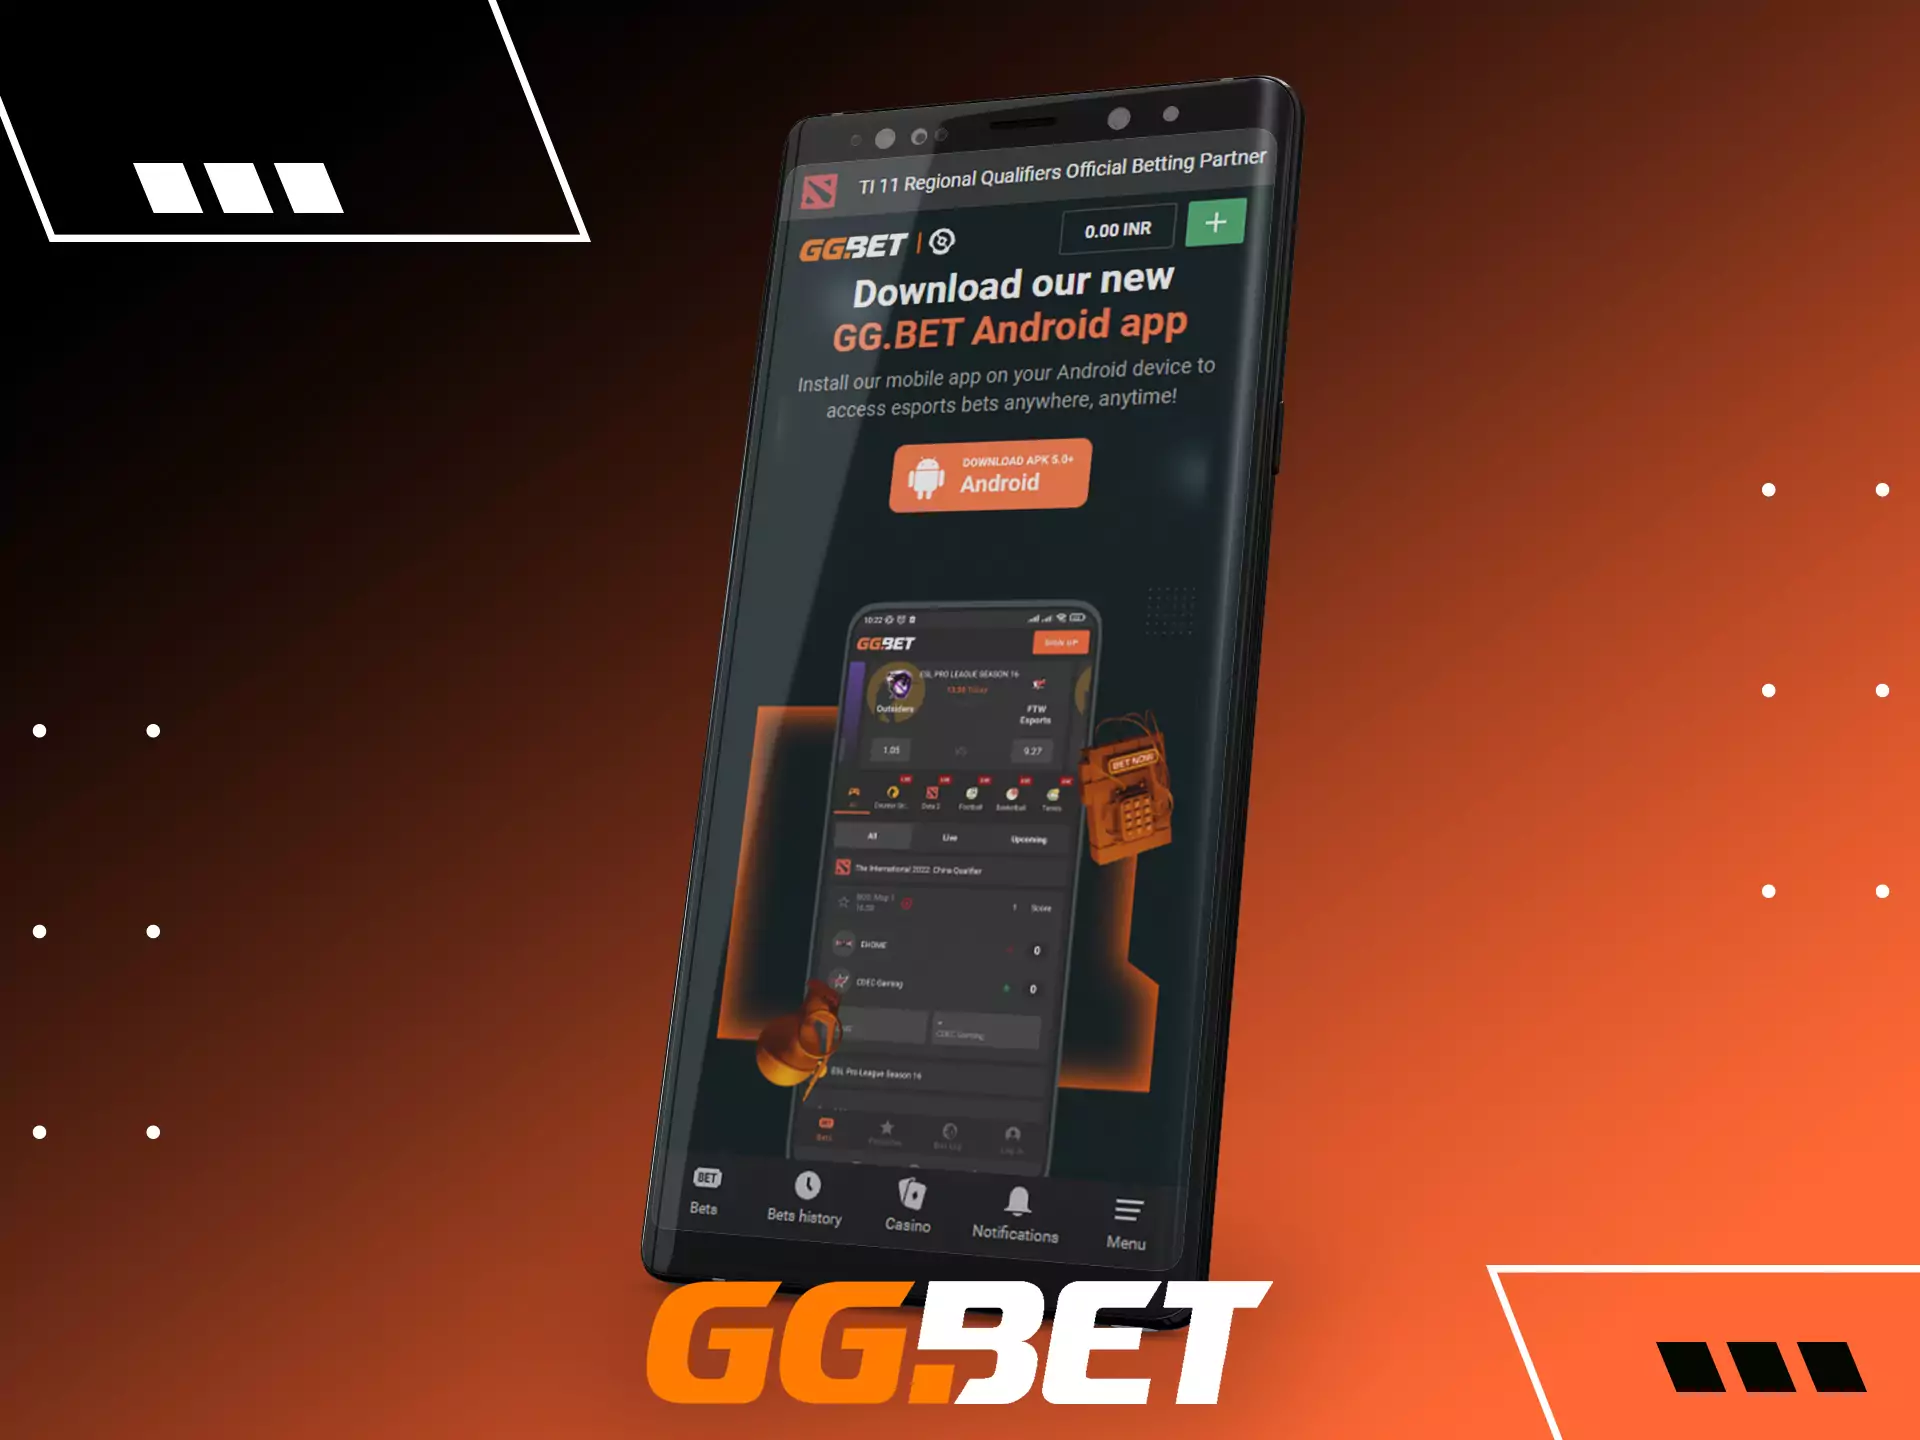 For Android devices, you can download the app from the official website of GGBet.